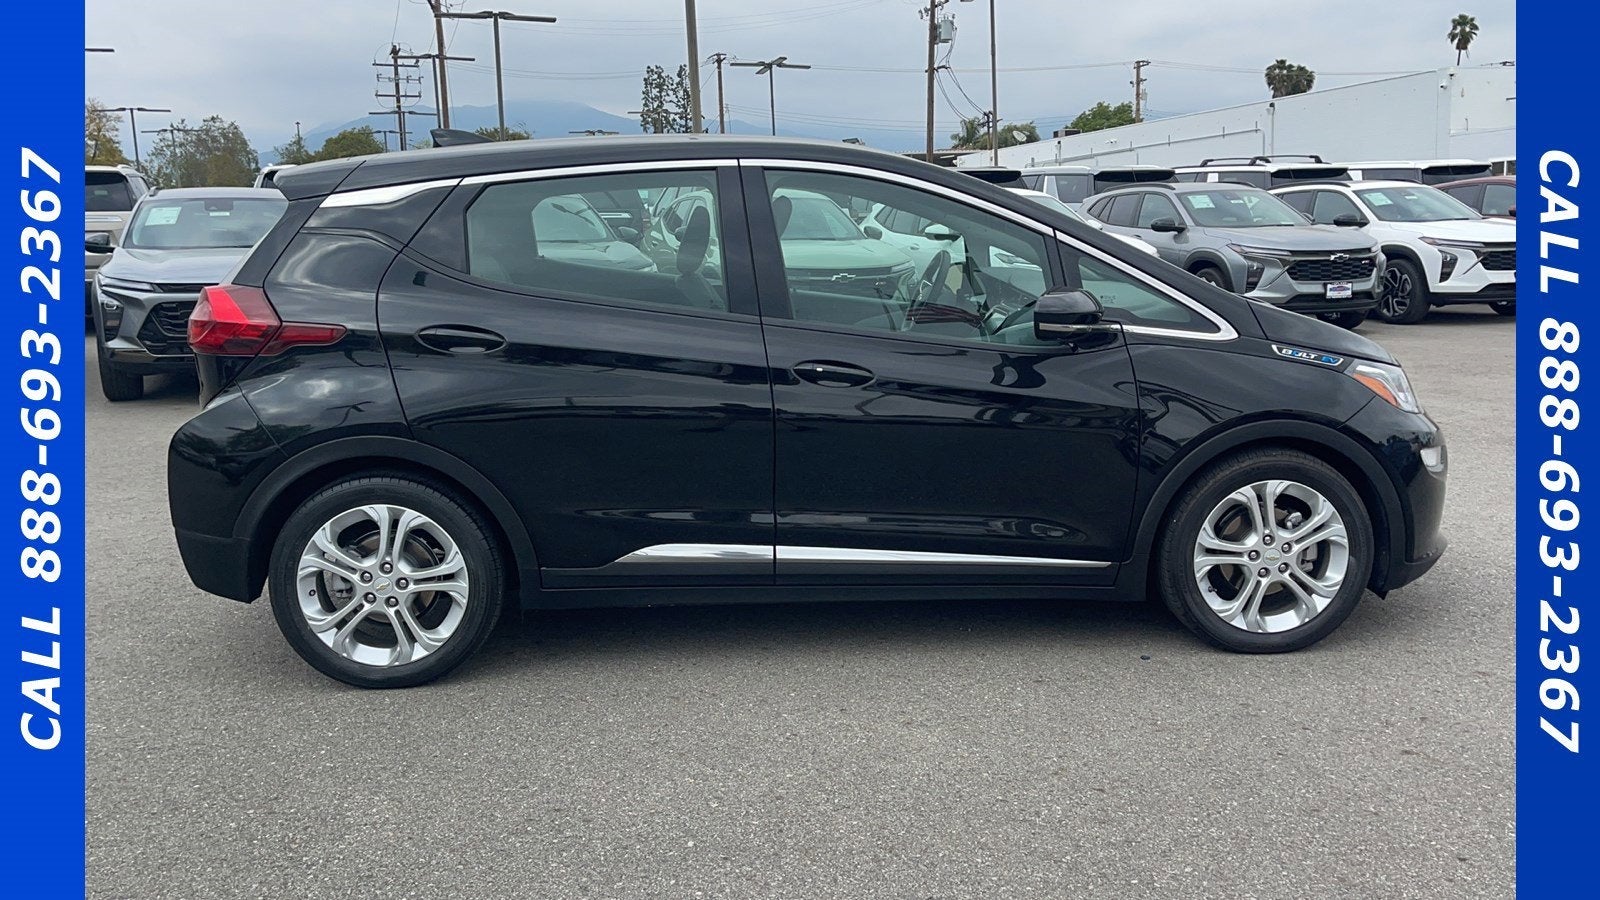 Used 2021 Chevrolet Bolt EV LT with VIN 1G1FY6S0XM4105784 for sale in Upland, CA